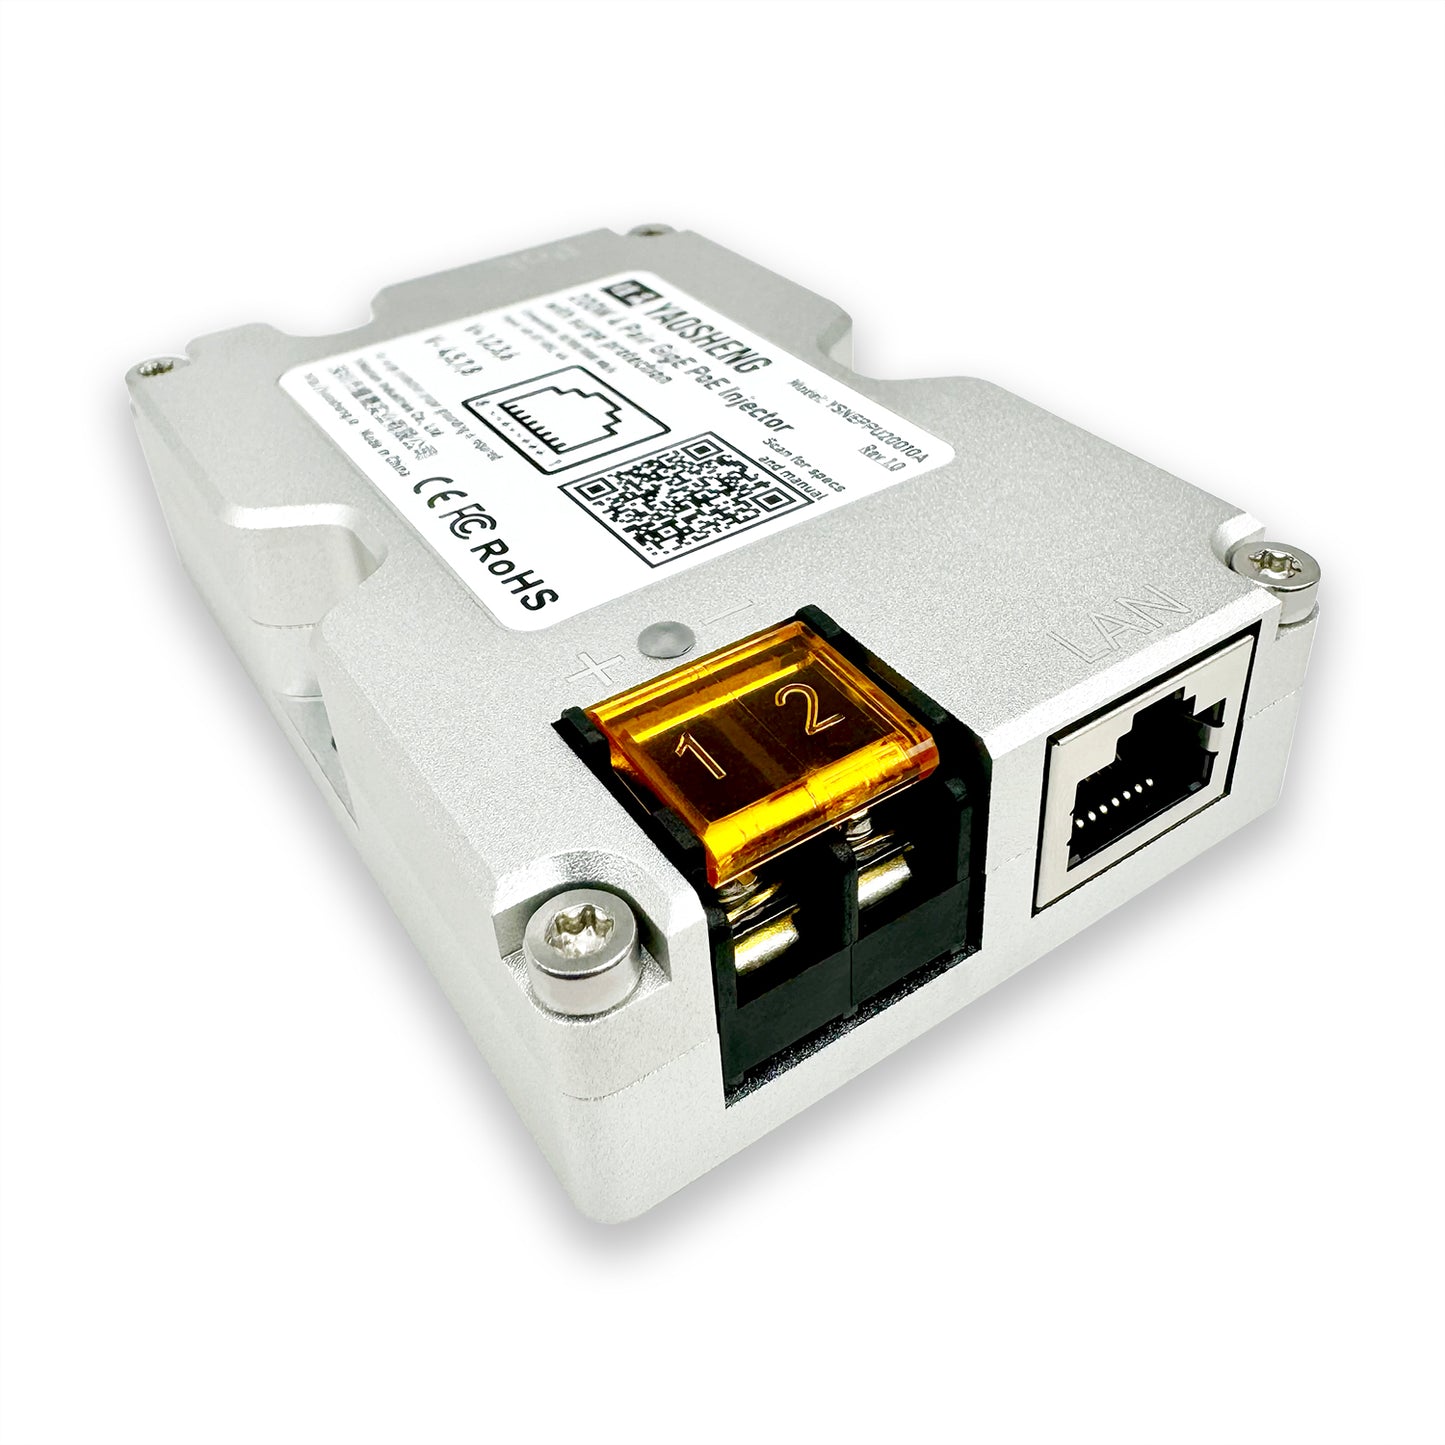 200W PoE Injector with Comprehensive Protection for All Standard Starlink Models